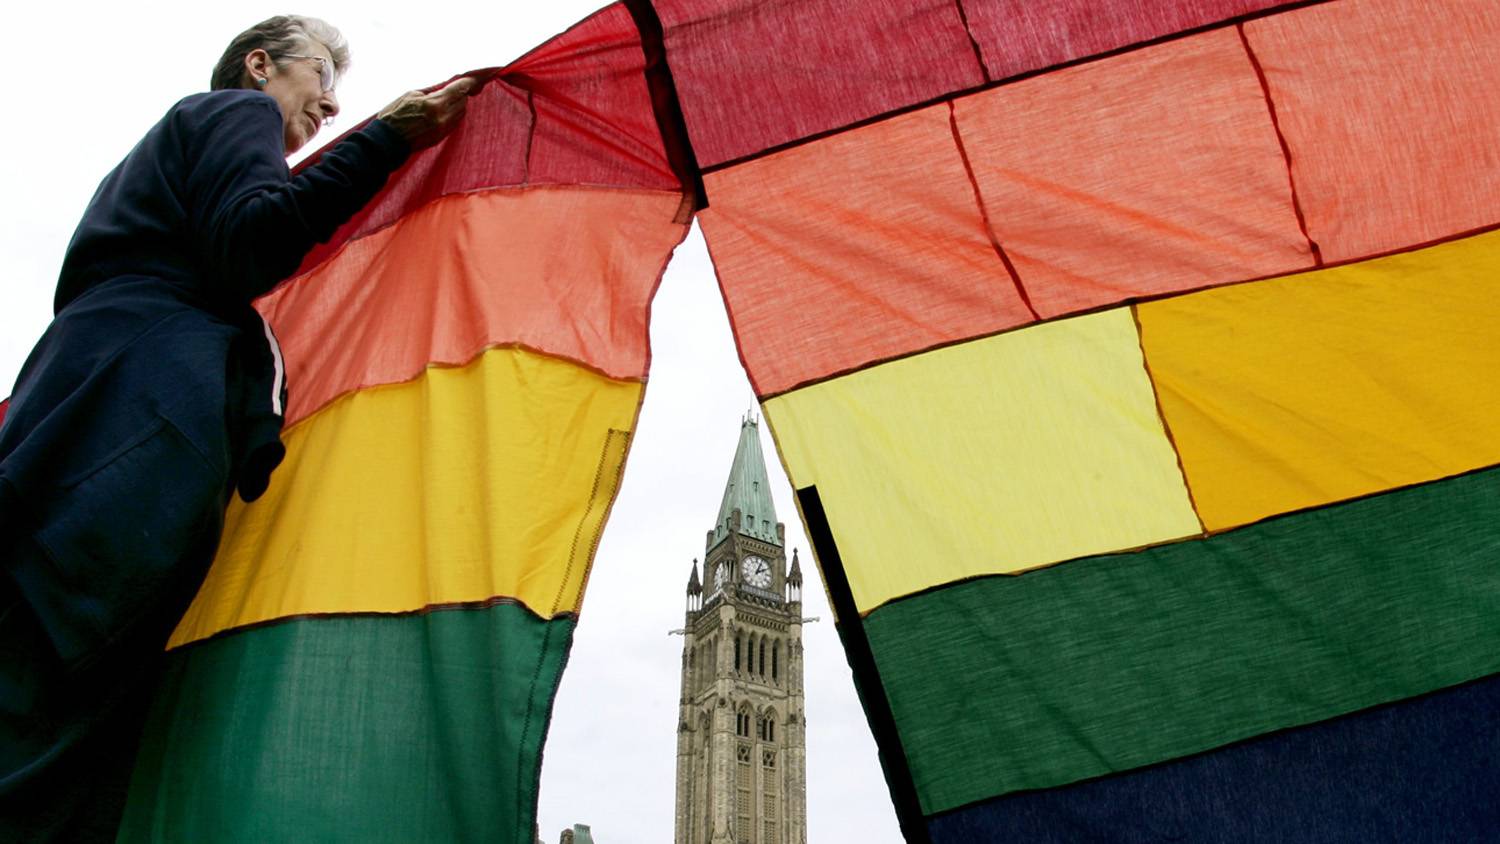 Despite legal about-face, Harper has no intention of reopening same-sex marriage